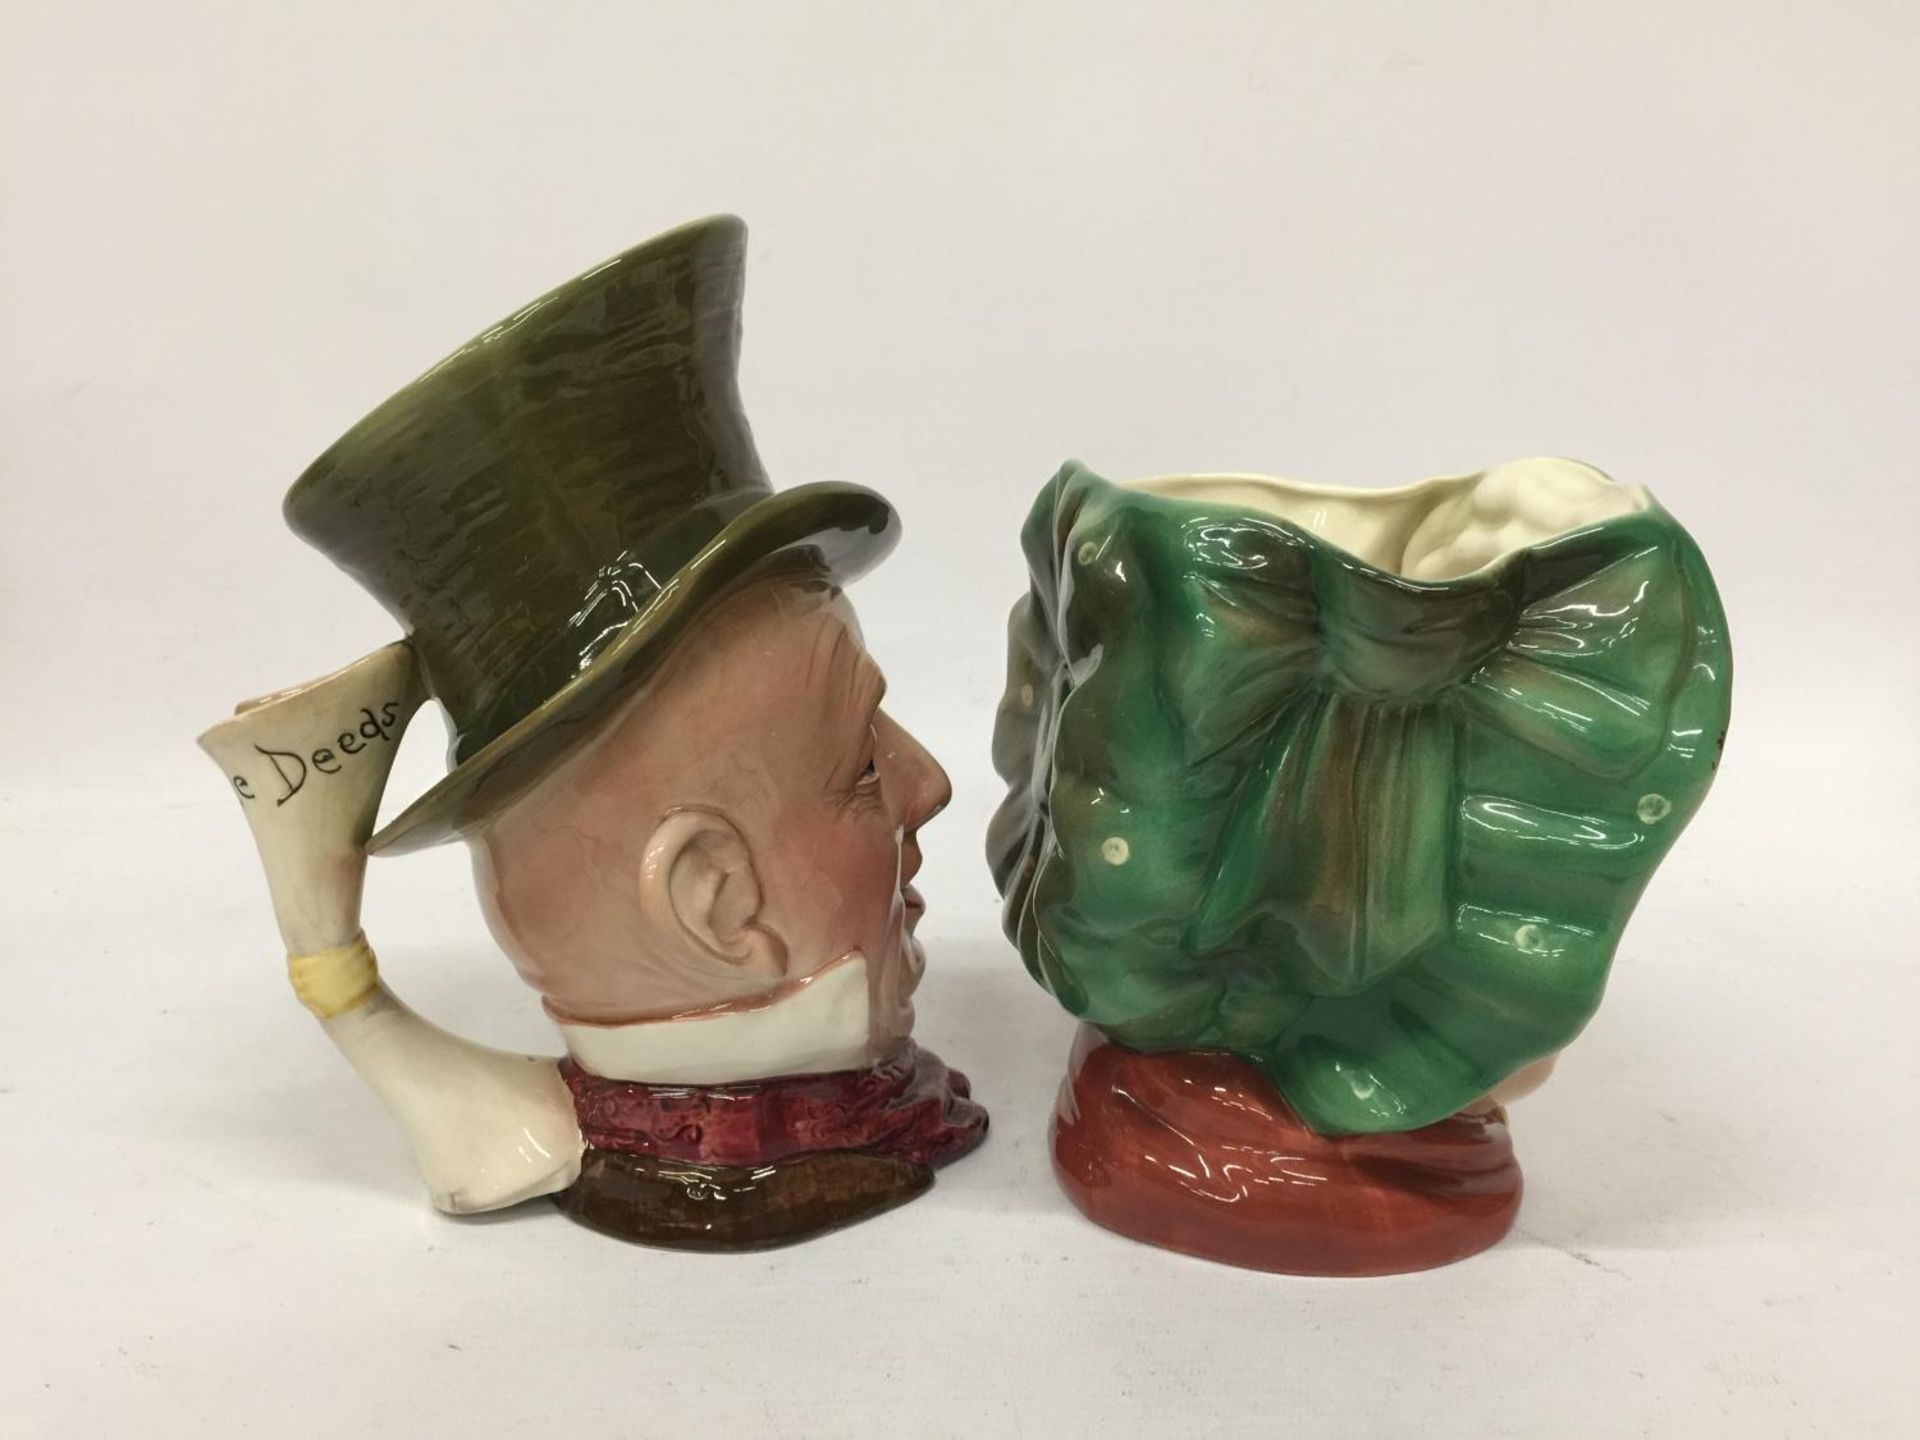 TWO BESWICK CHARACTER JUGS - MICAWBER AND SAIREY GAMP - 23CM AND 16.5 CM - Image 2 of 6